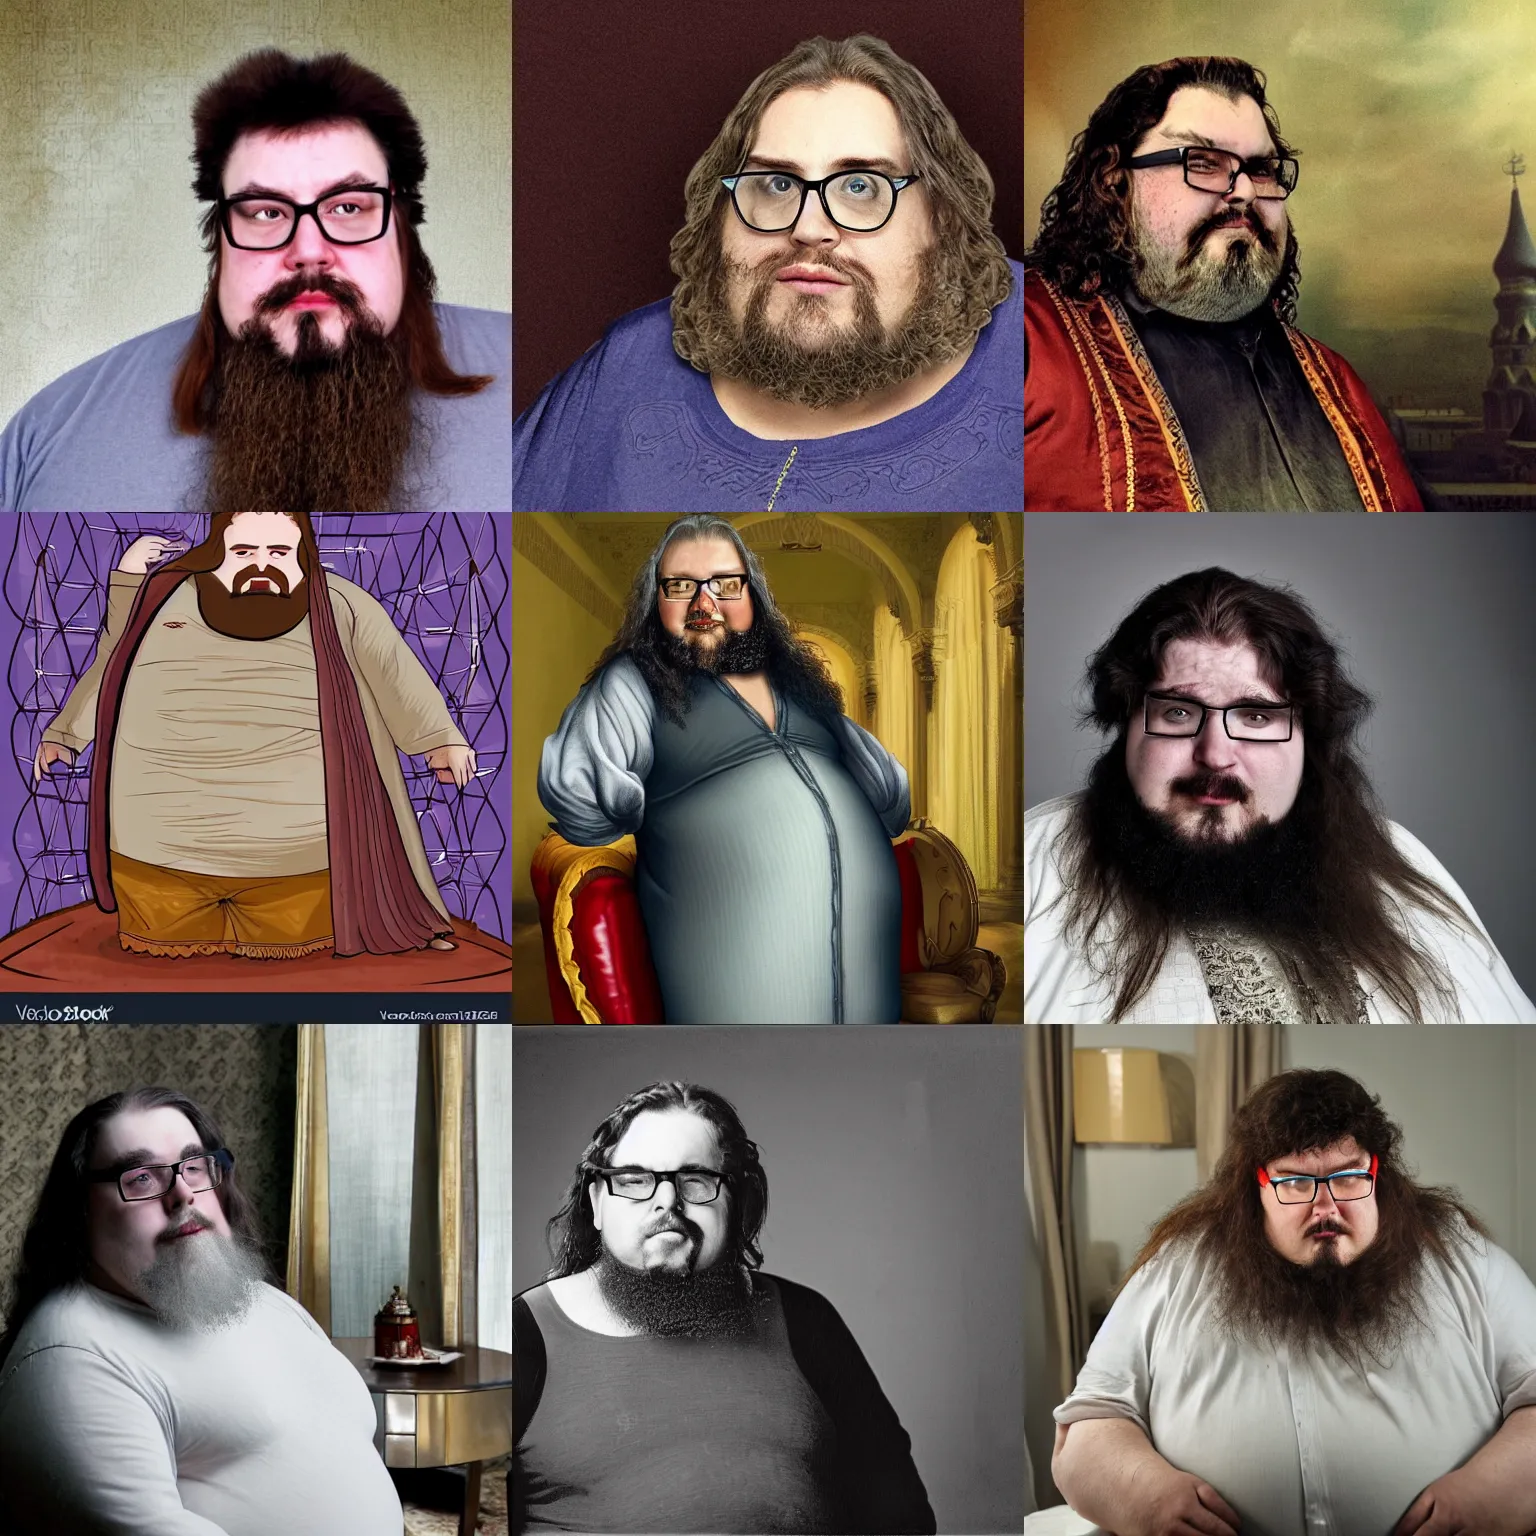 Prompt: obese russian long - haired sci - fi writer with goatee and glasses pretending himself as an emperor